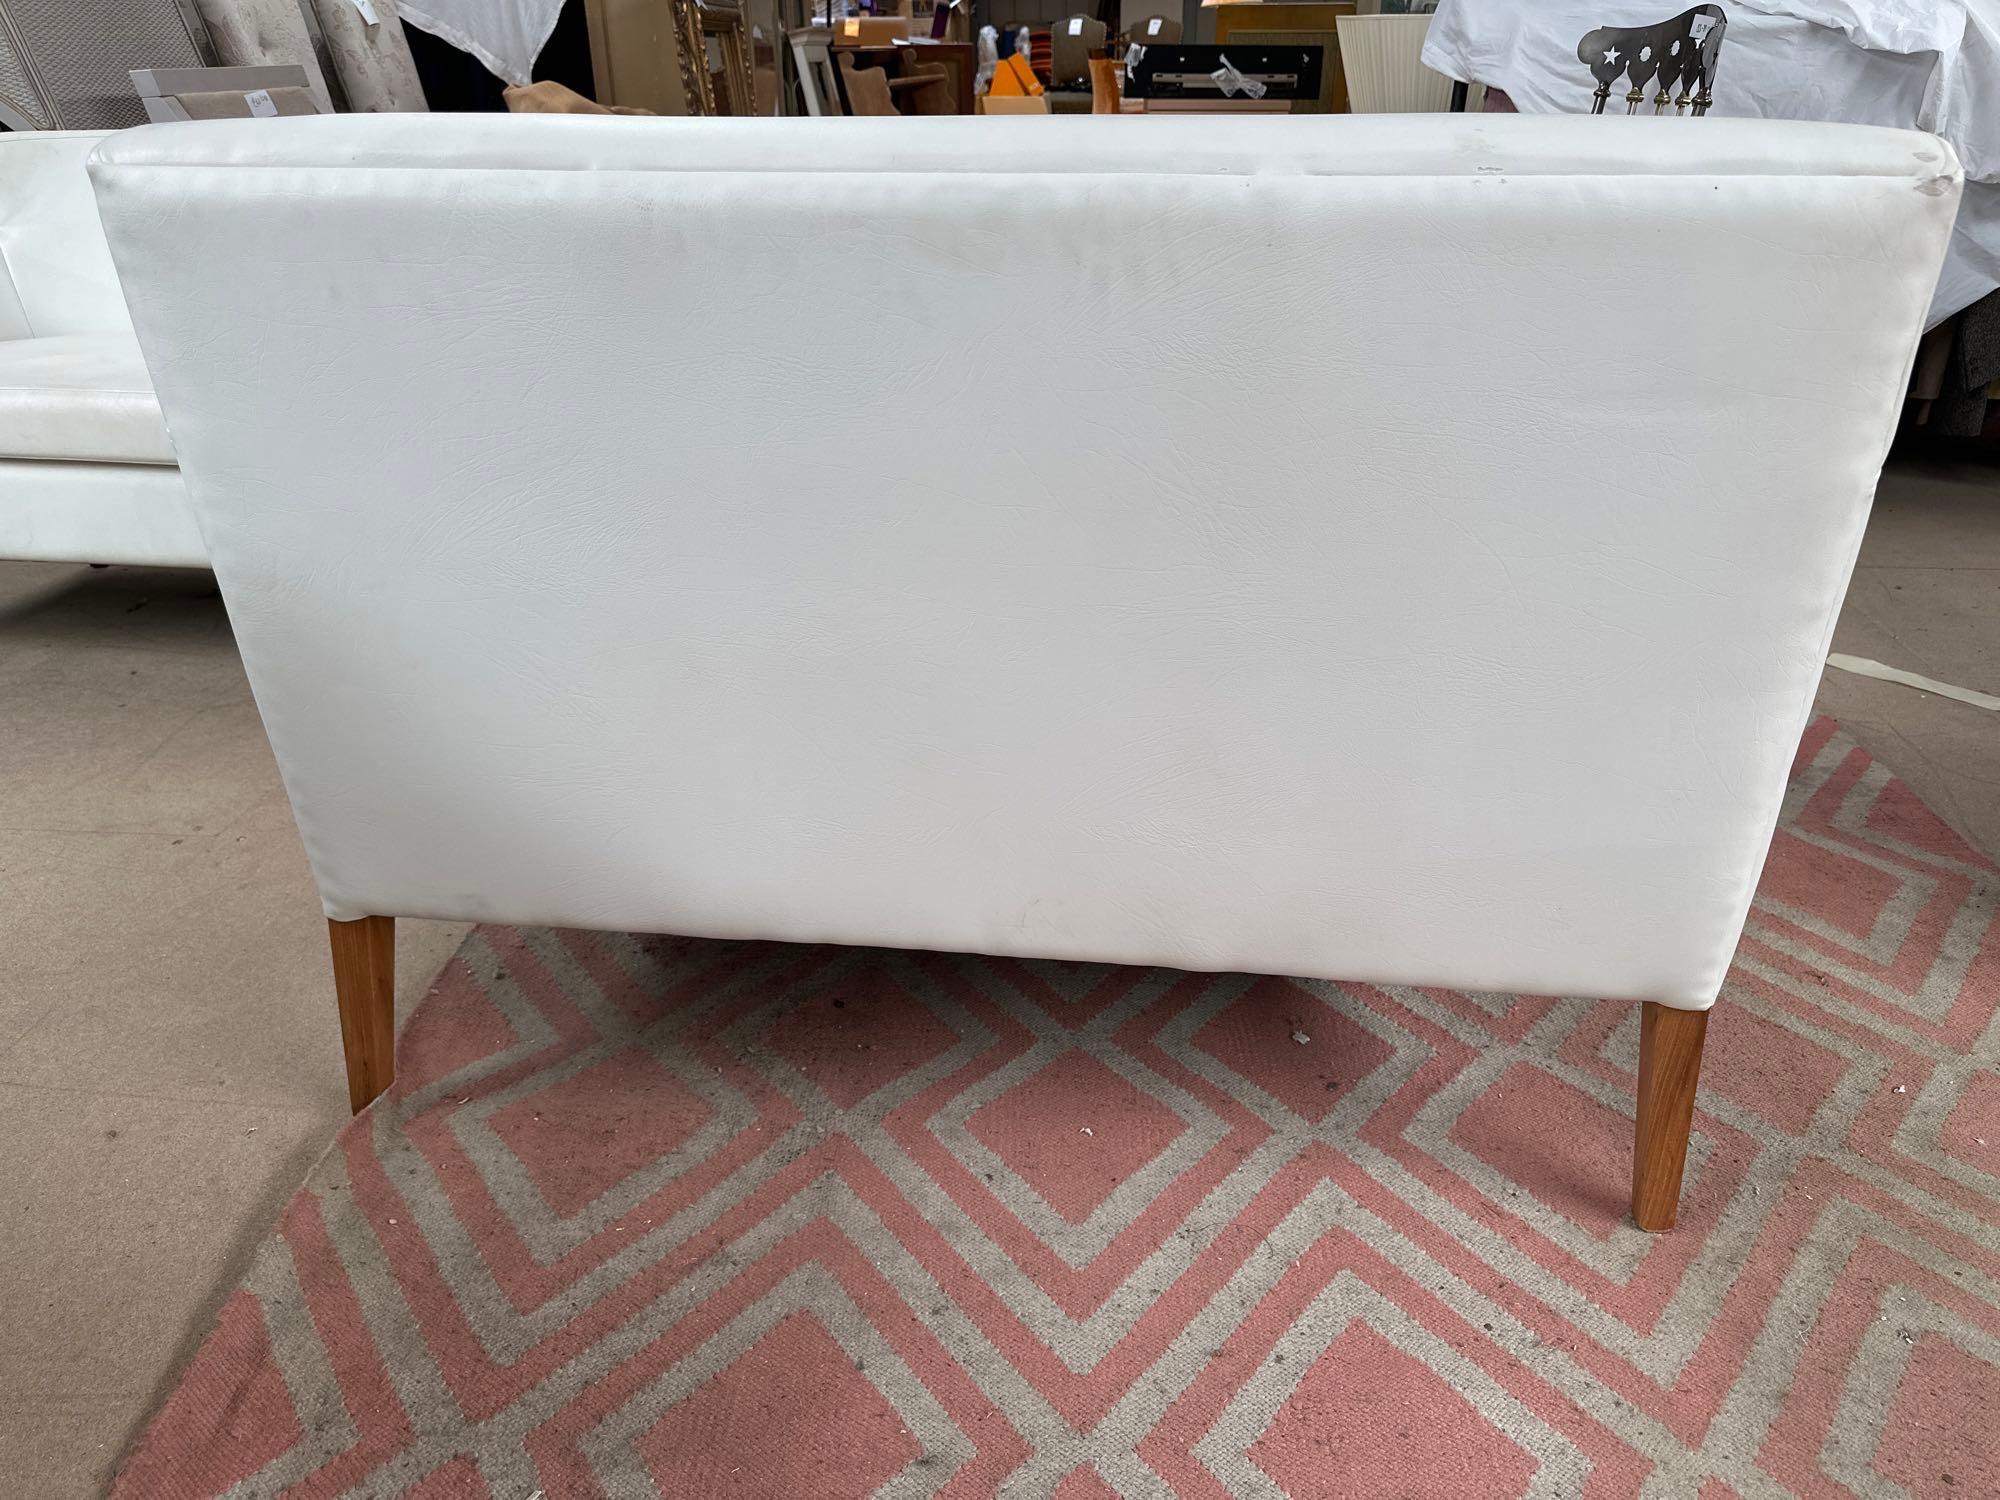 C. S. Contract Furniture Of Shropshire Upholstered White Leather Two Seater Sofa On Wooden Legs - Image 3 of 5